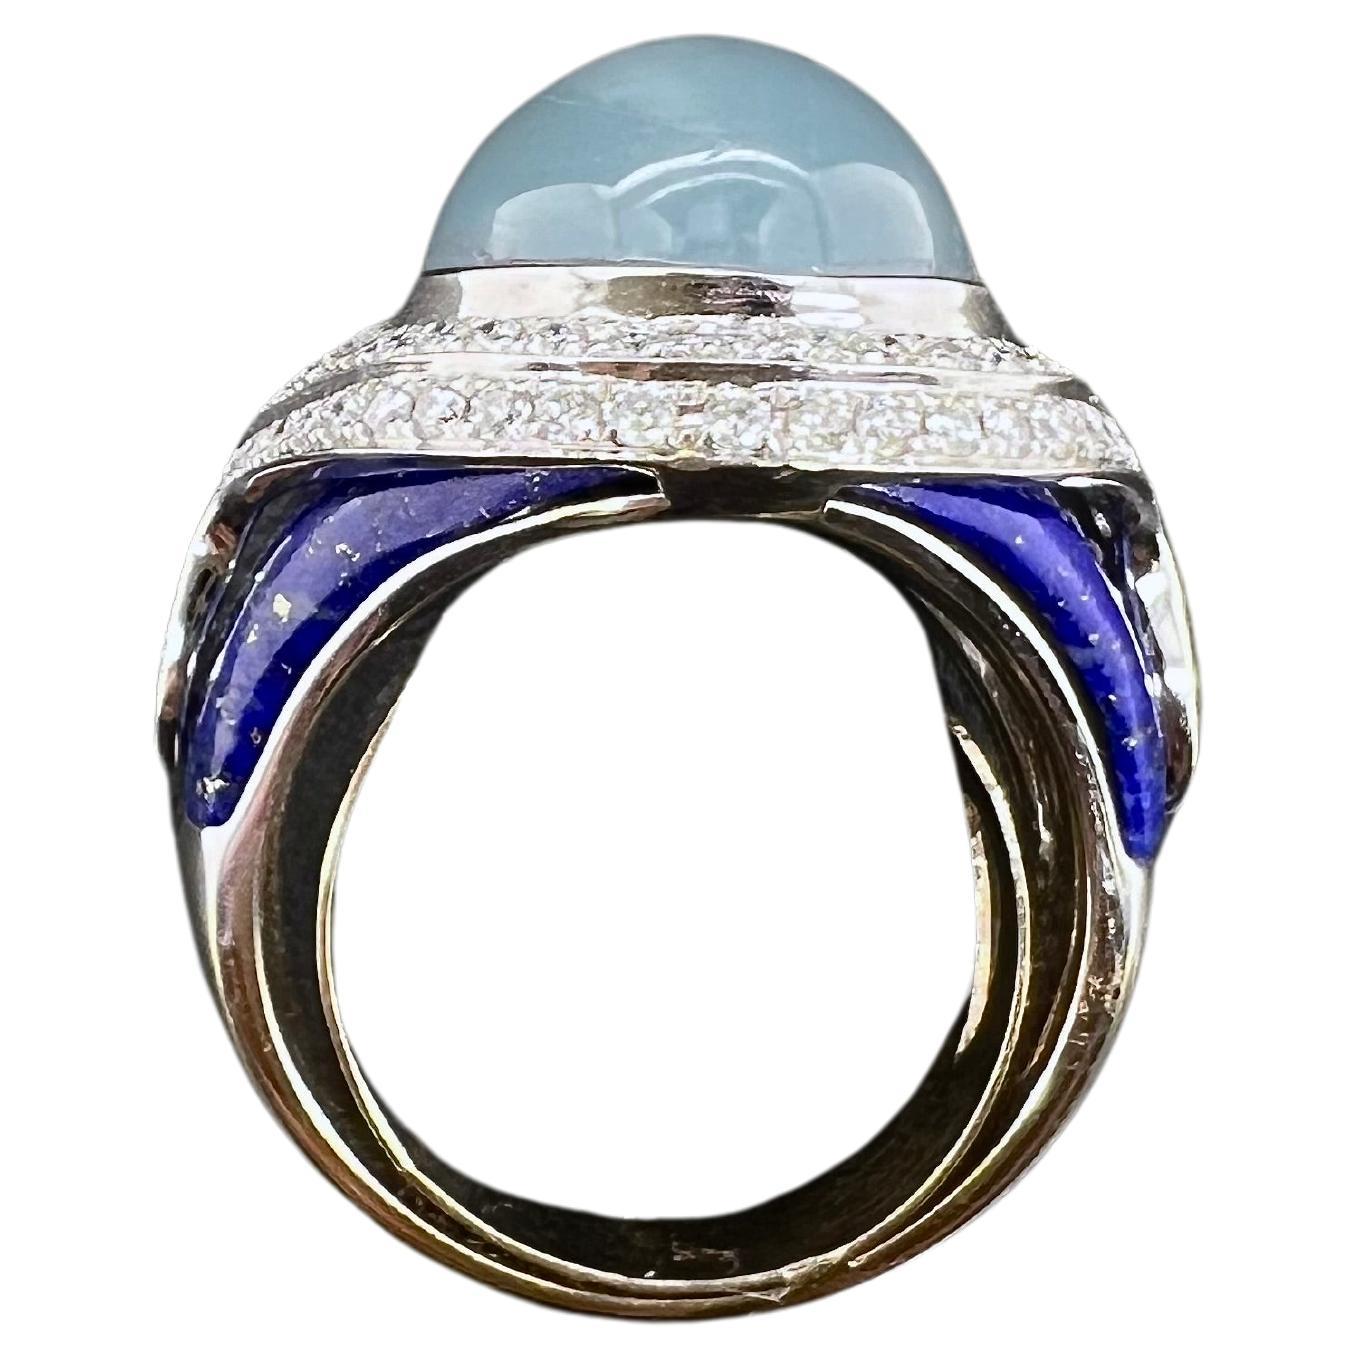 Contemporary 18k White Gold Cabochon Aquamarine Ring with Lapis Lazuli and Diamonds For Sale